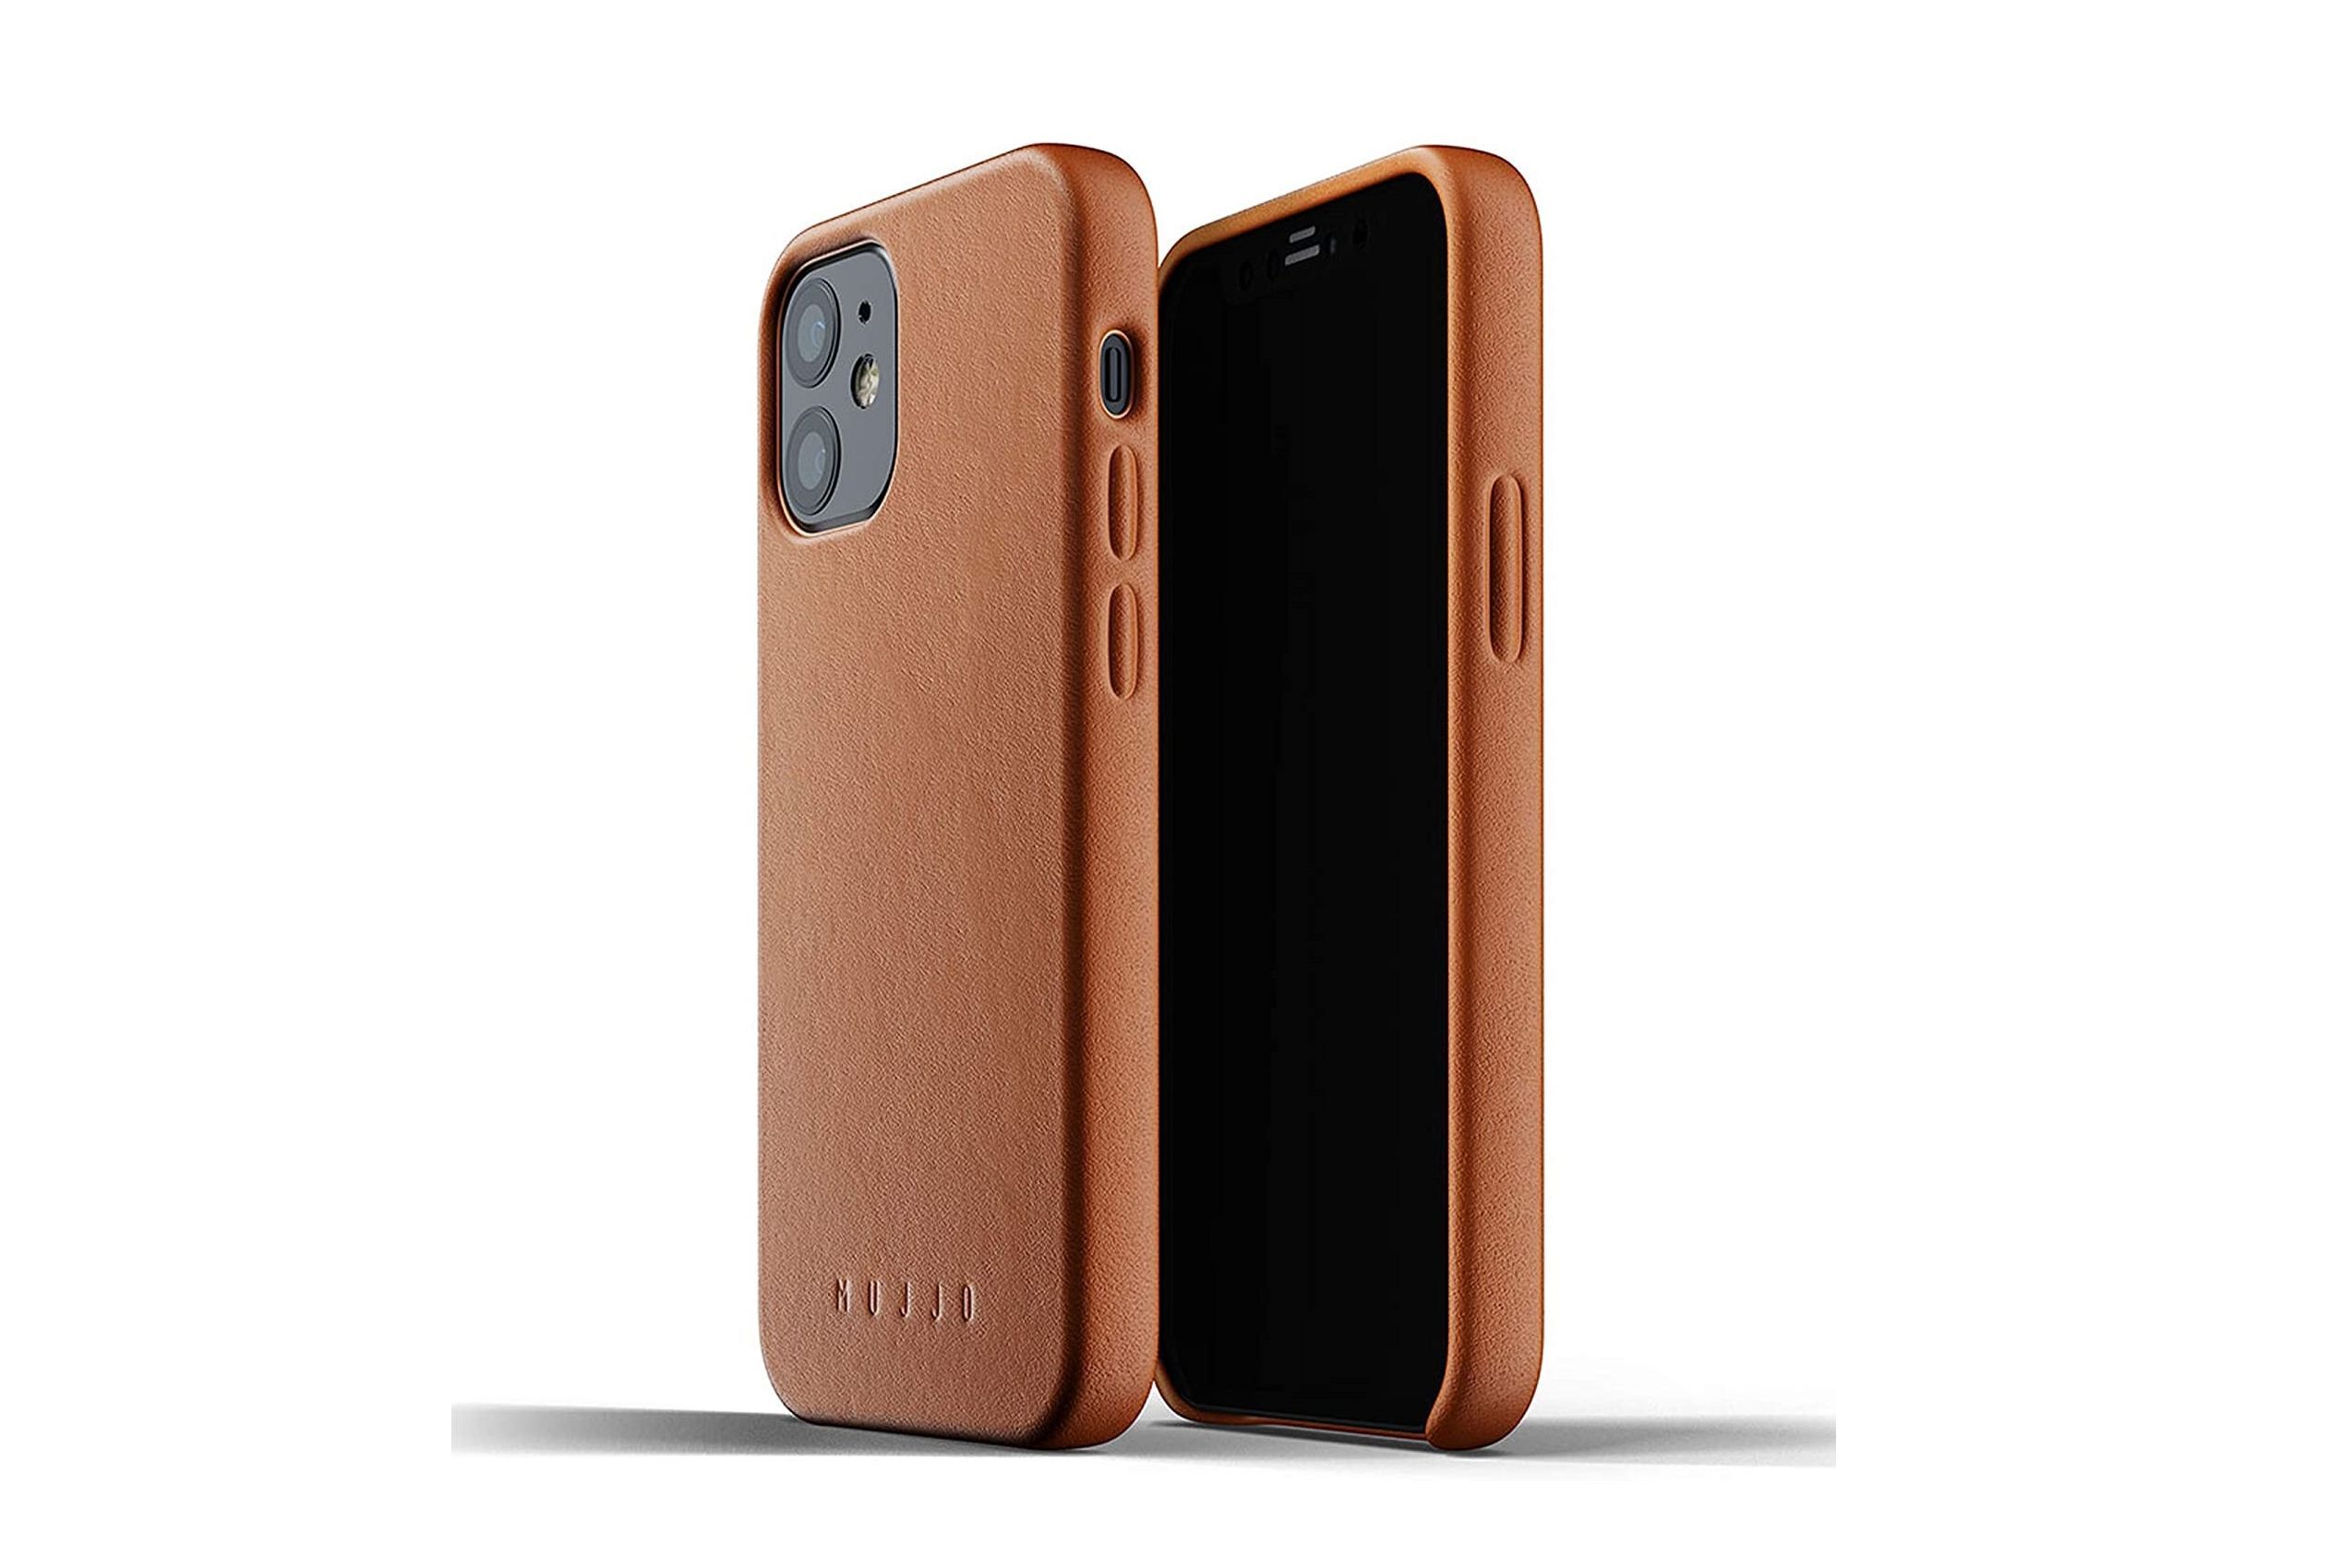 Mujjo Full Leather iPhone 12 mini case - The best iPhone 12 mini cases you can get - updated July 2022